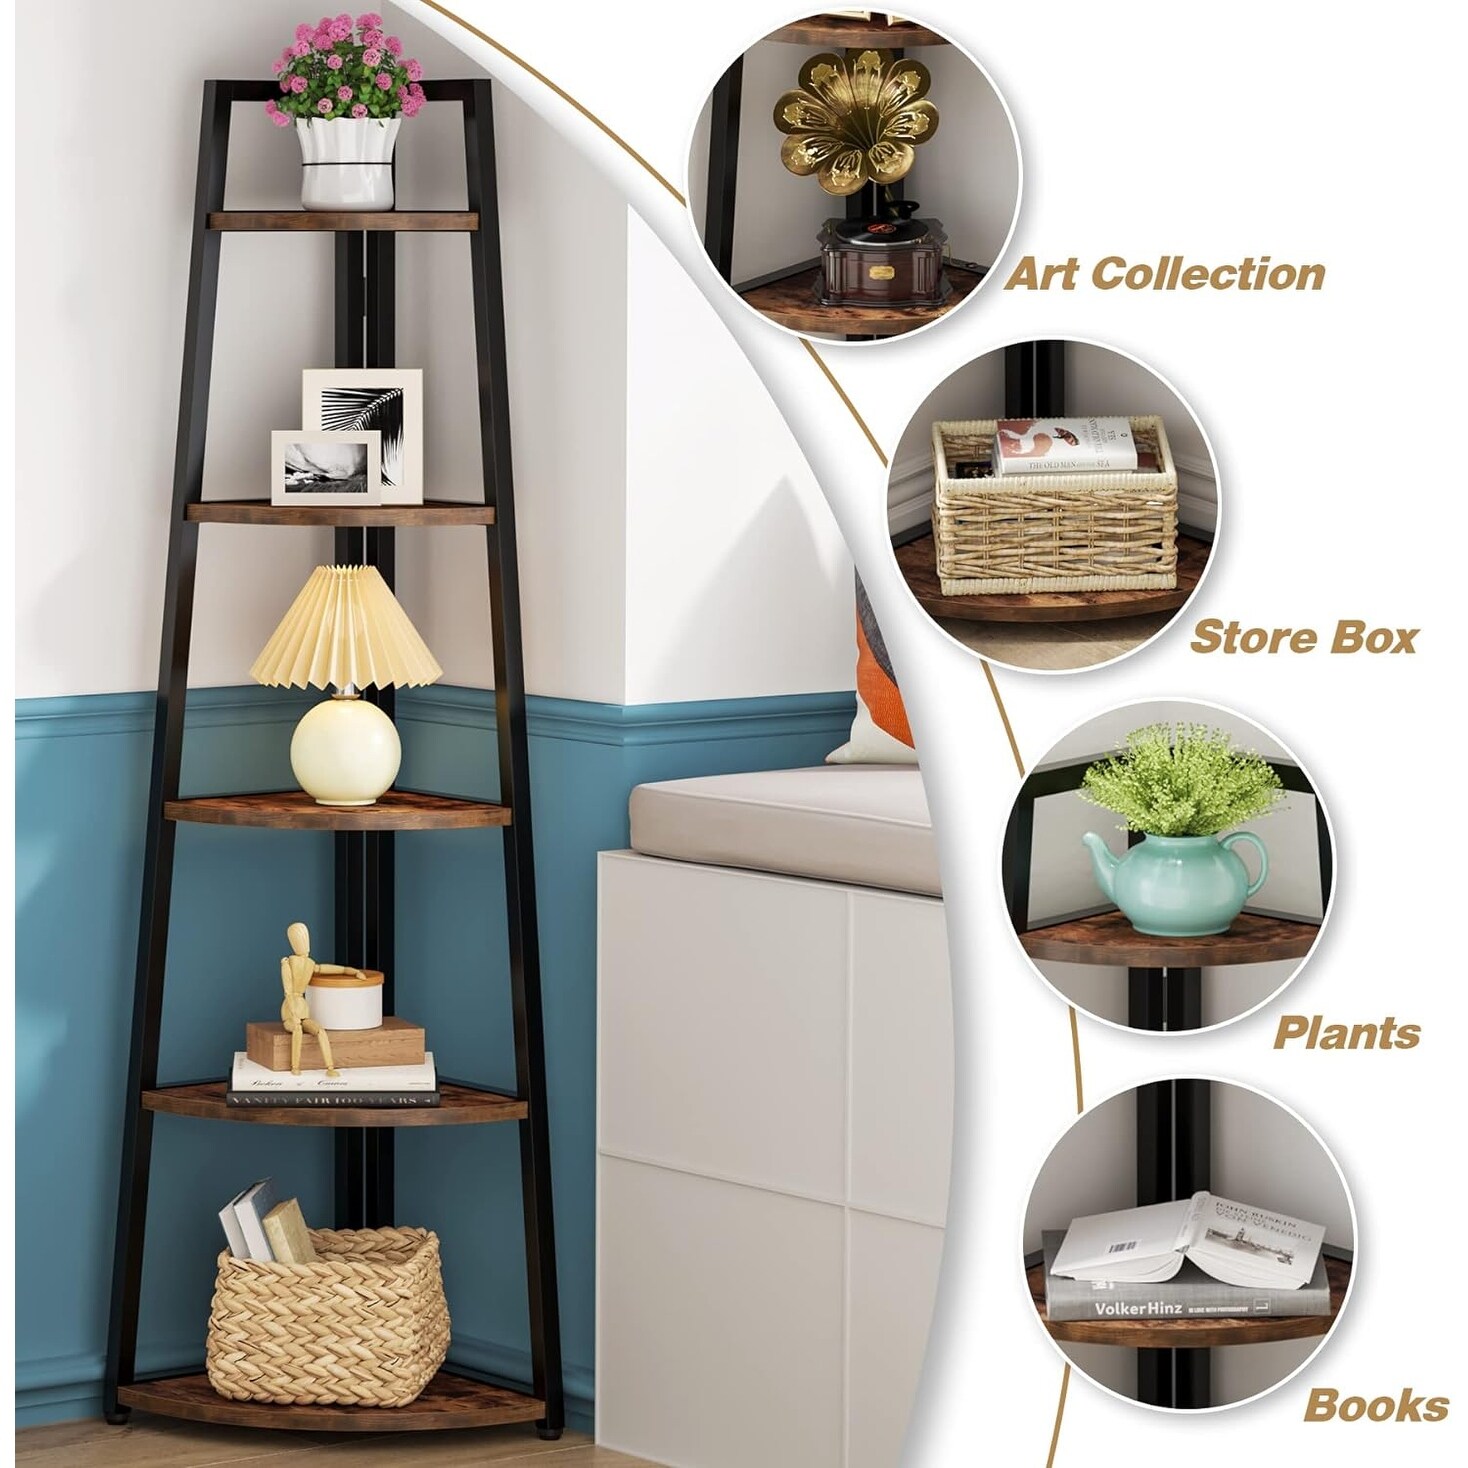 https://ak1.ostkcdn.com/images/products/is/images/direct/880b4c3d1fe9321ccd22e8e167917bf6f5e0f432/70-inch-Tall-Corner-Shelves%2C-5-Tier-Corner-Bookshelf-and-Bookcase.jpg